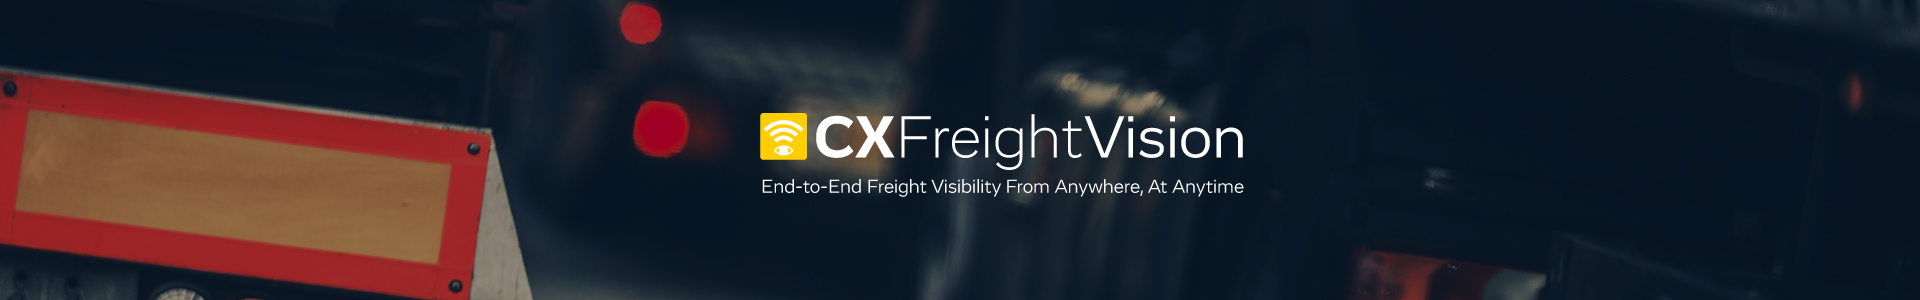 Freight-Vision-Banner-1920x300-2